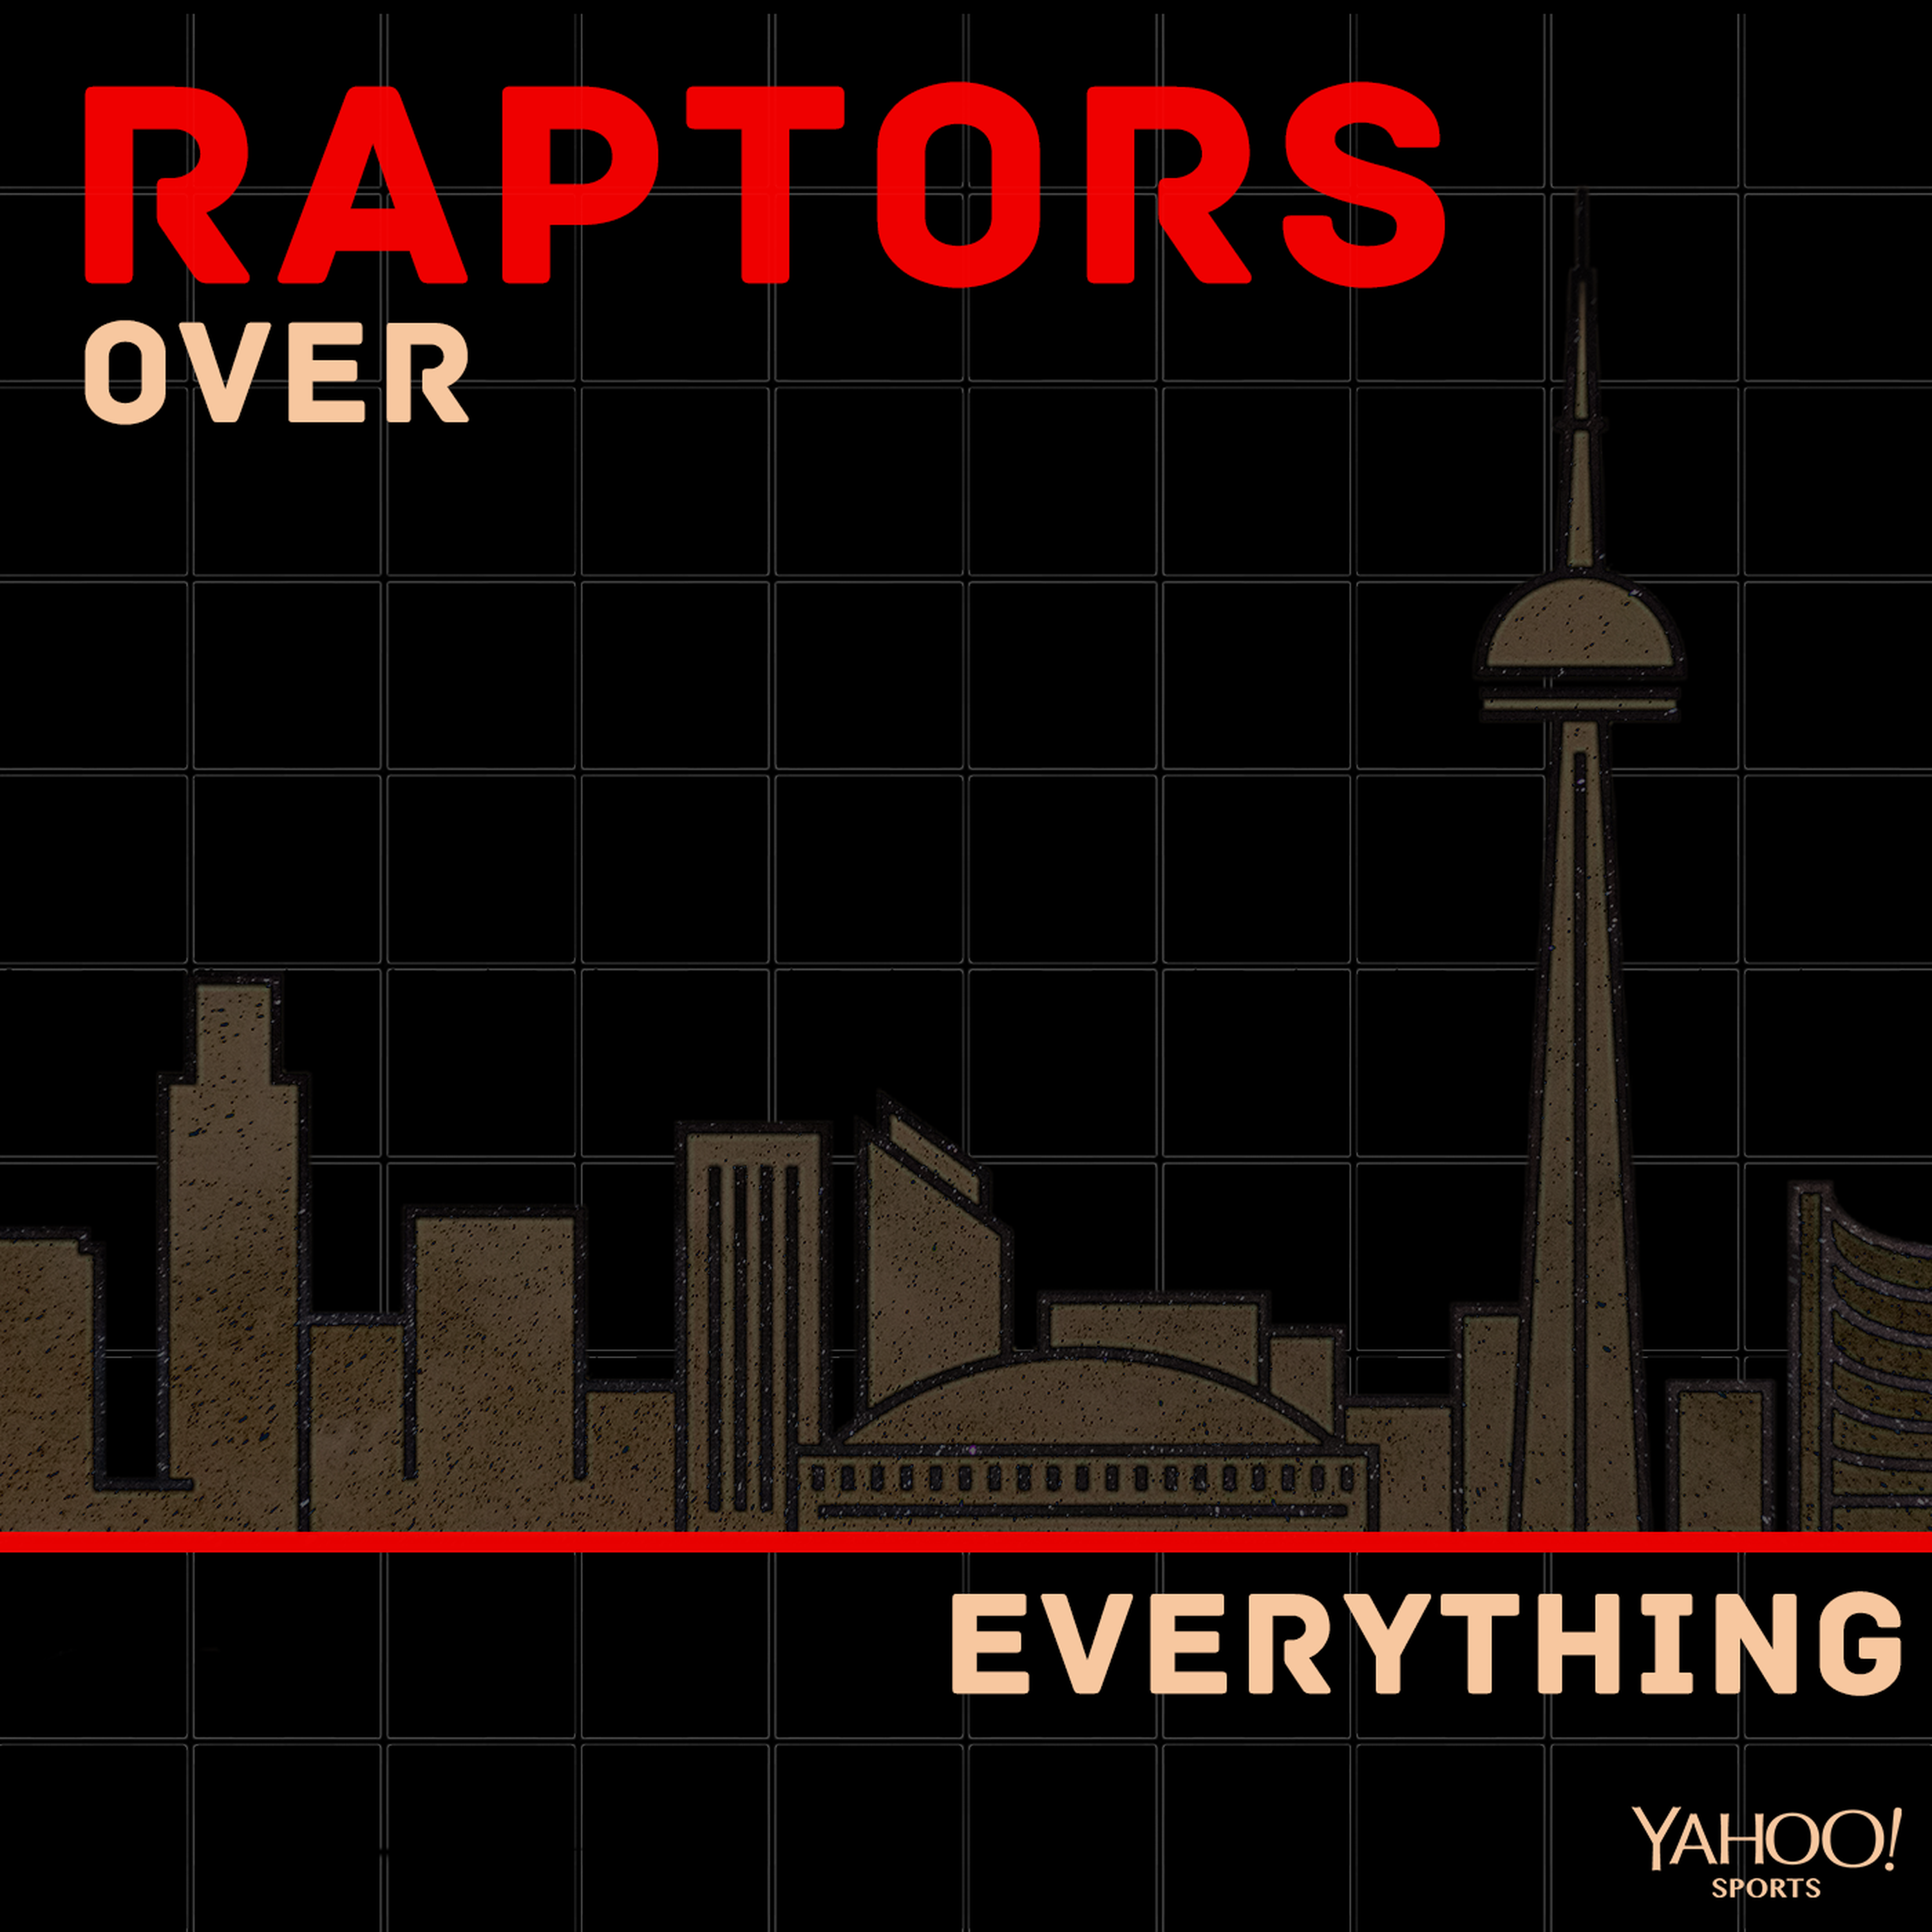 Raptors off to promising start, with Pascal Siakam and Fred VanVleet leading the way